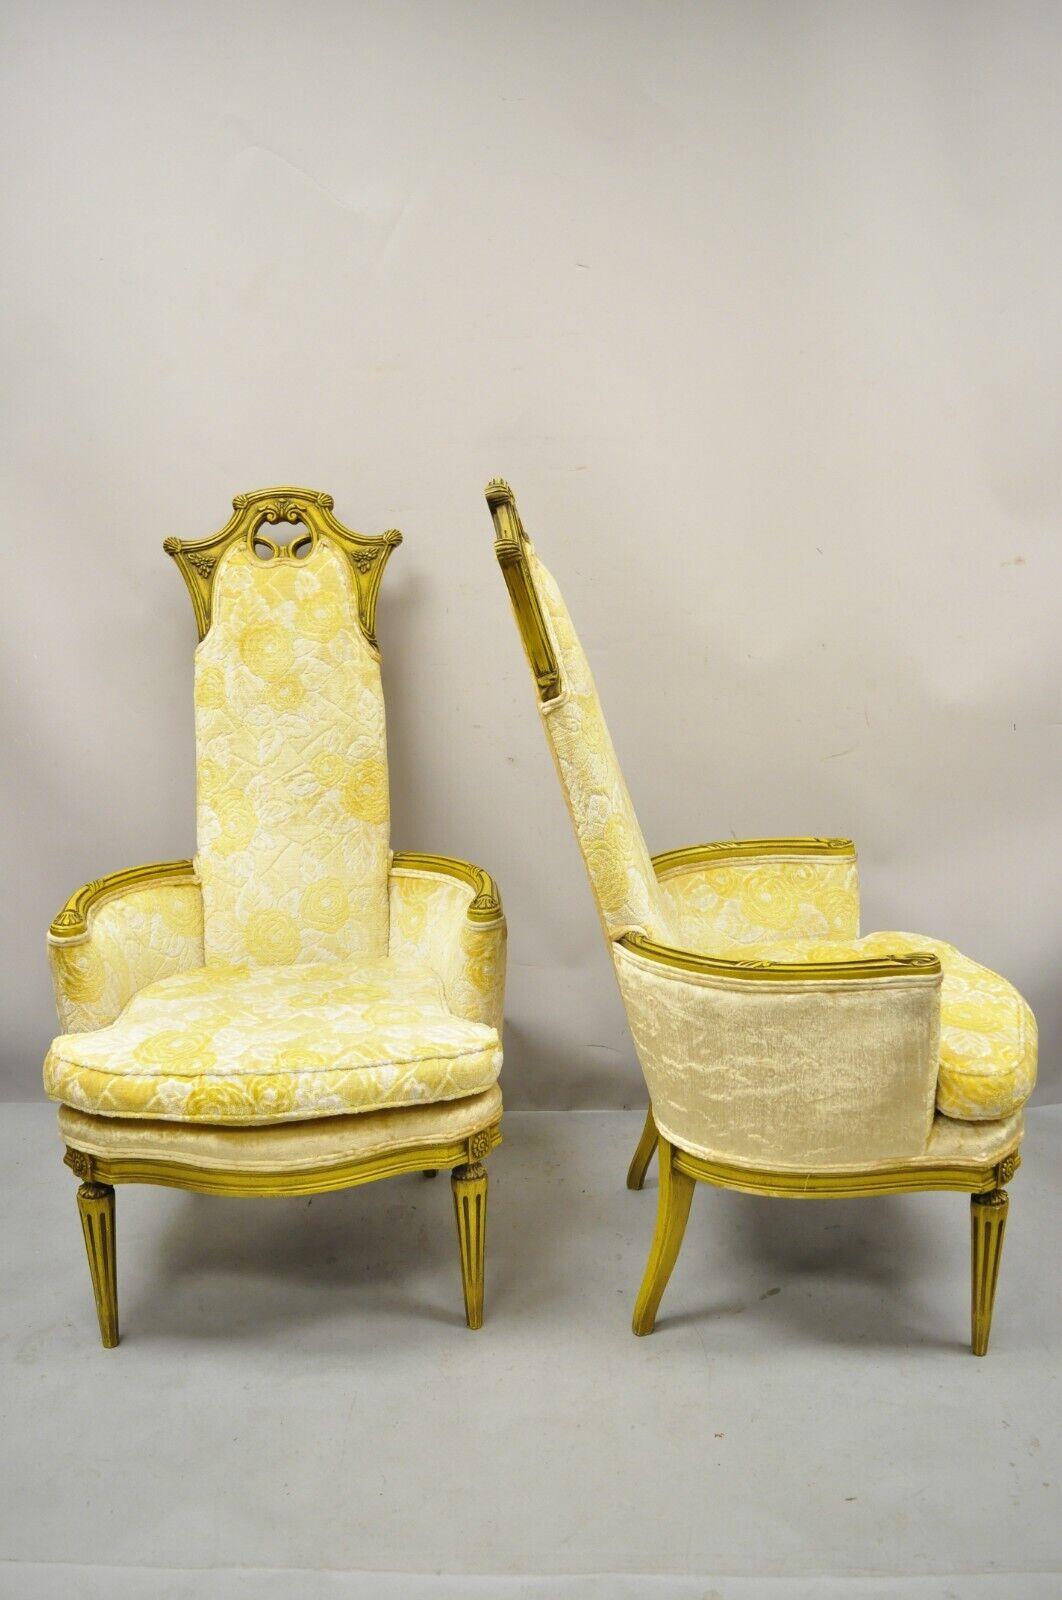 Vintage French Hollywood Regency Yellow Fireside Lounge Chairs - a Pair For Sale 4